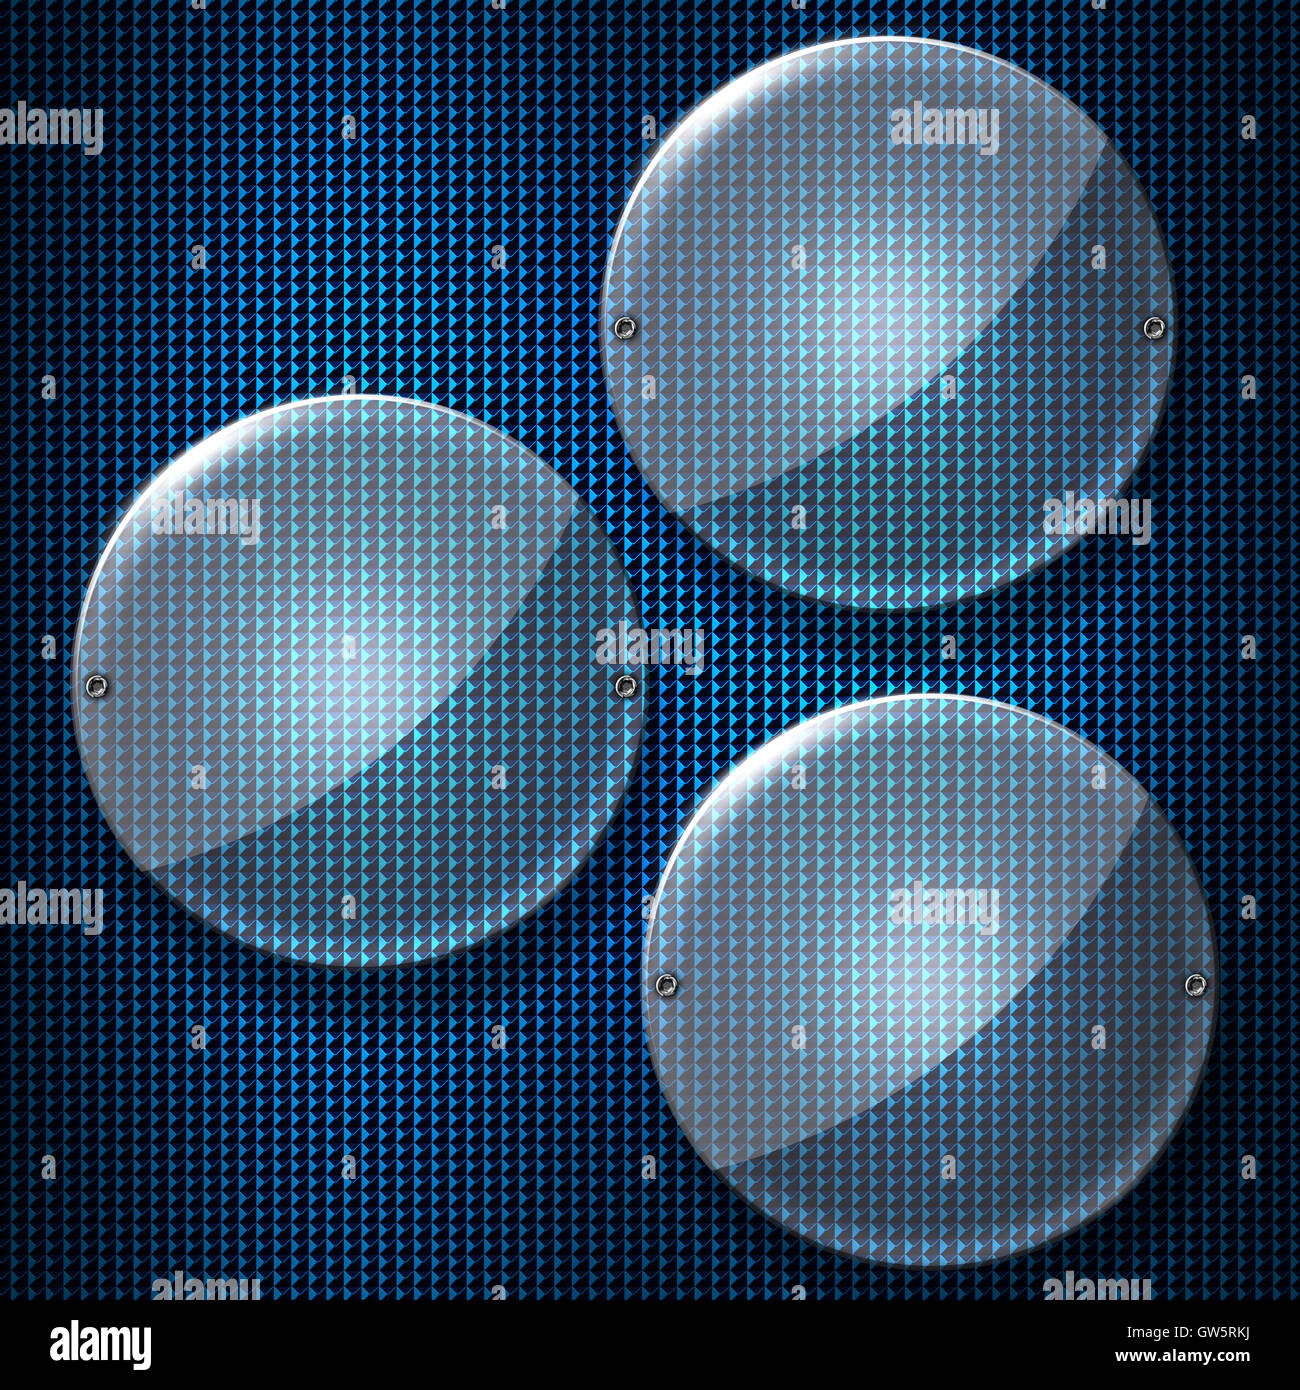 set 8. circle glossy glass with rivet on blue mesh metal wall. 3d illustration background. Stock Photo